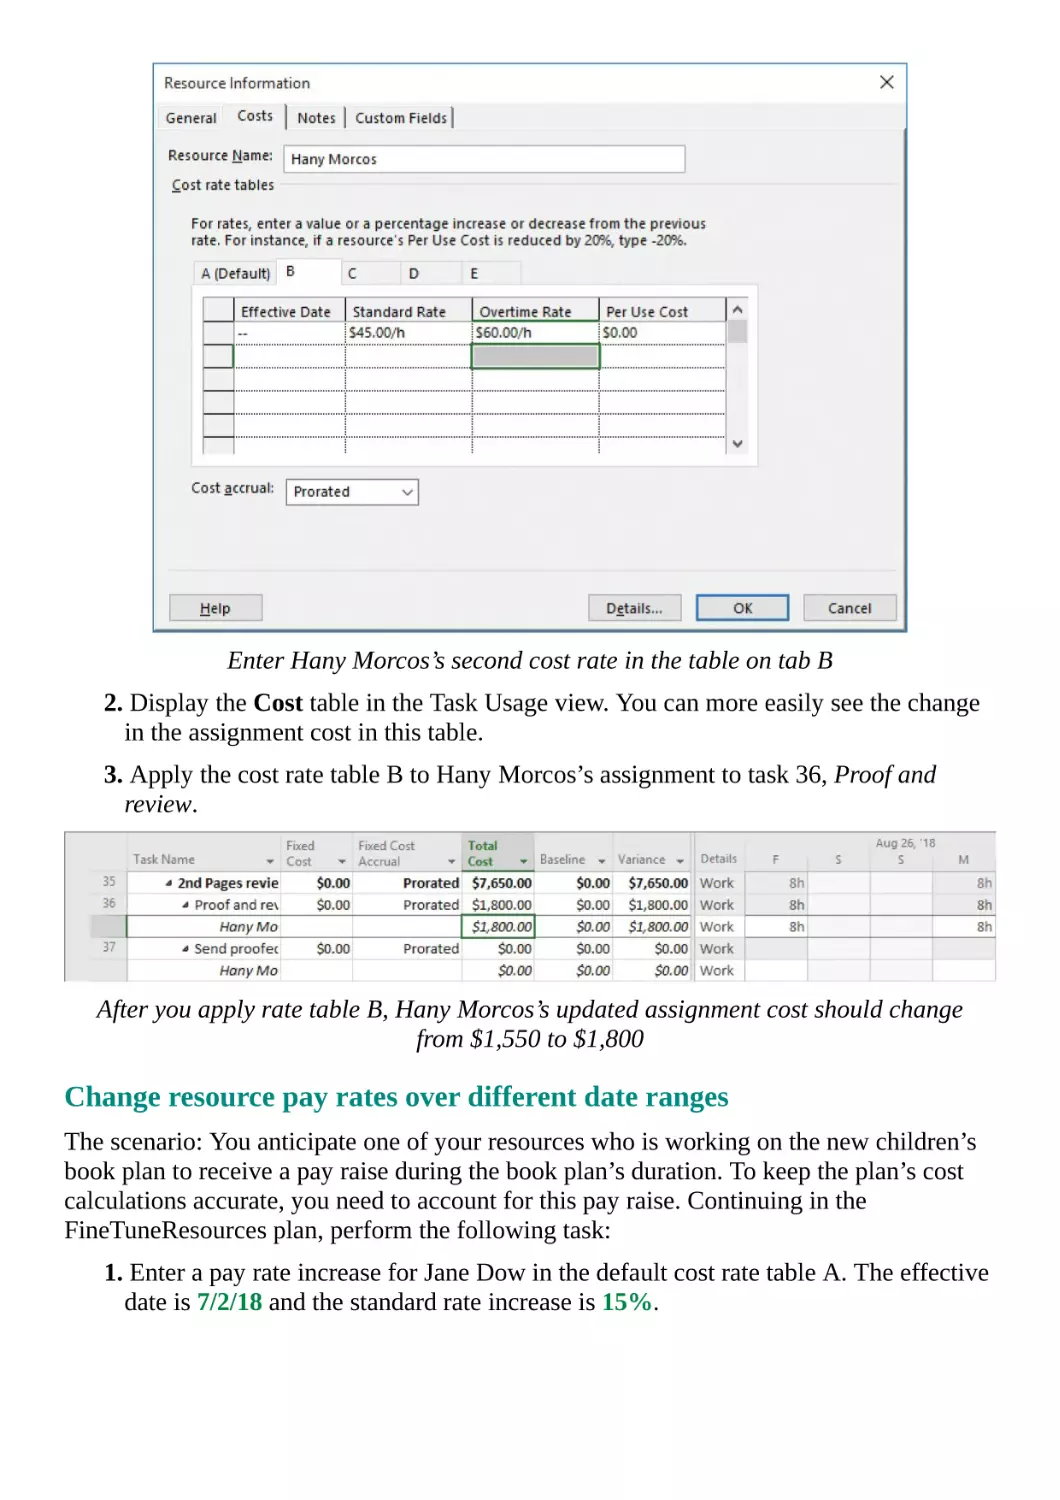 Change resource pay rates over different date ranges